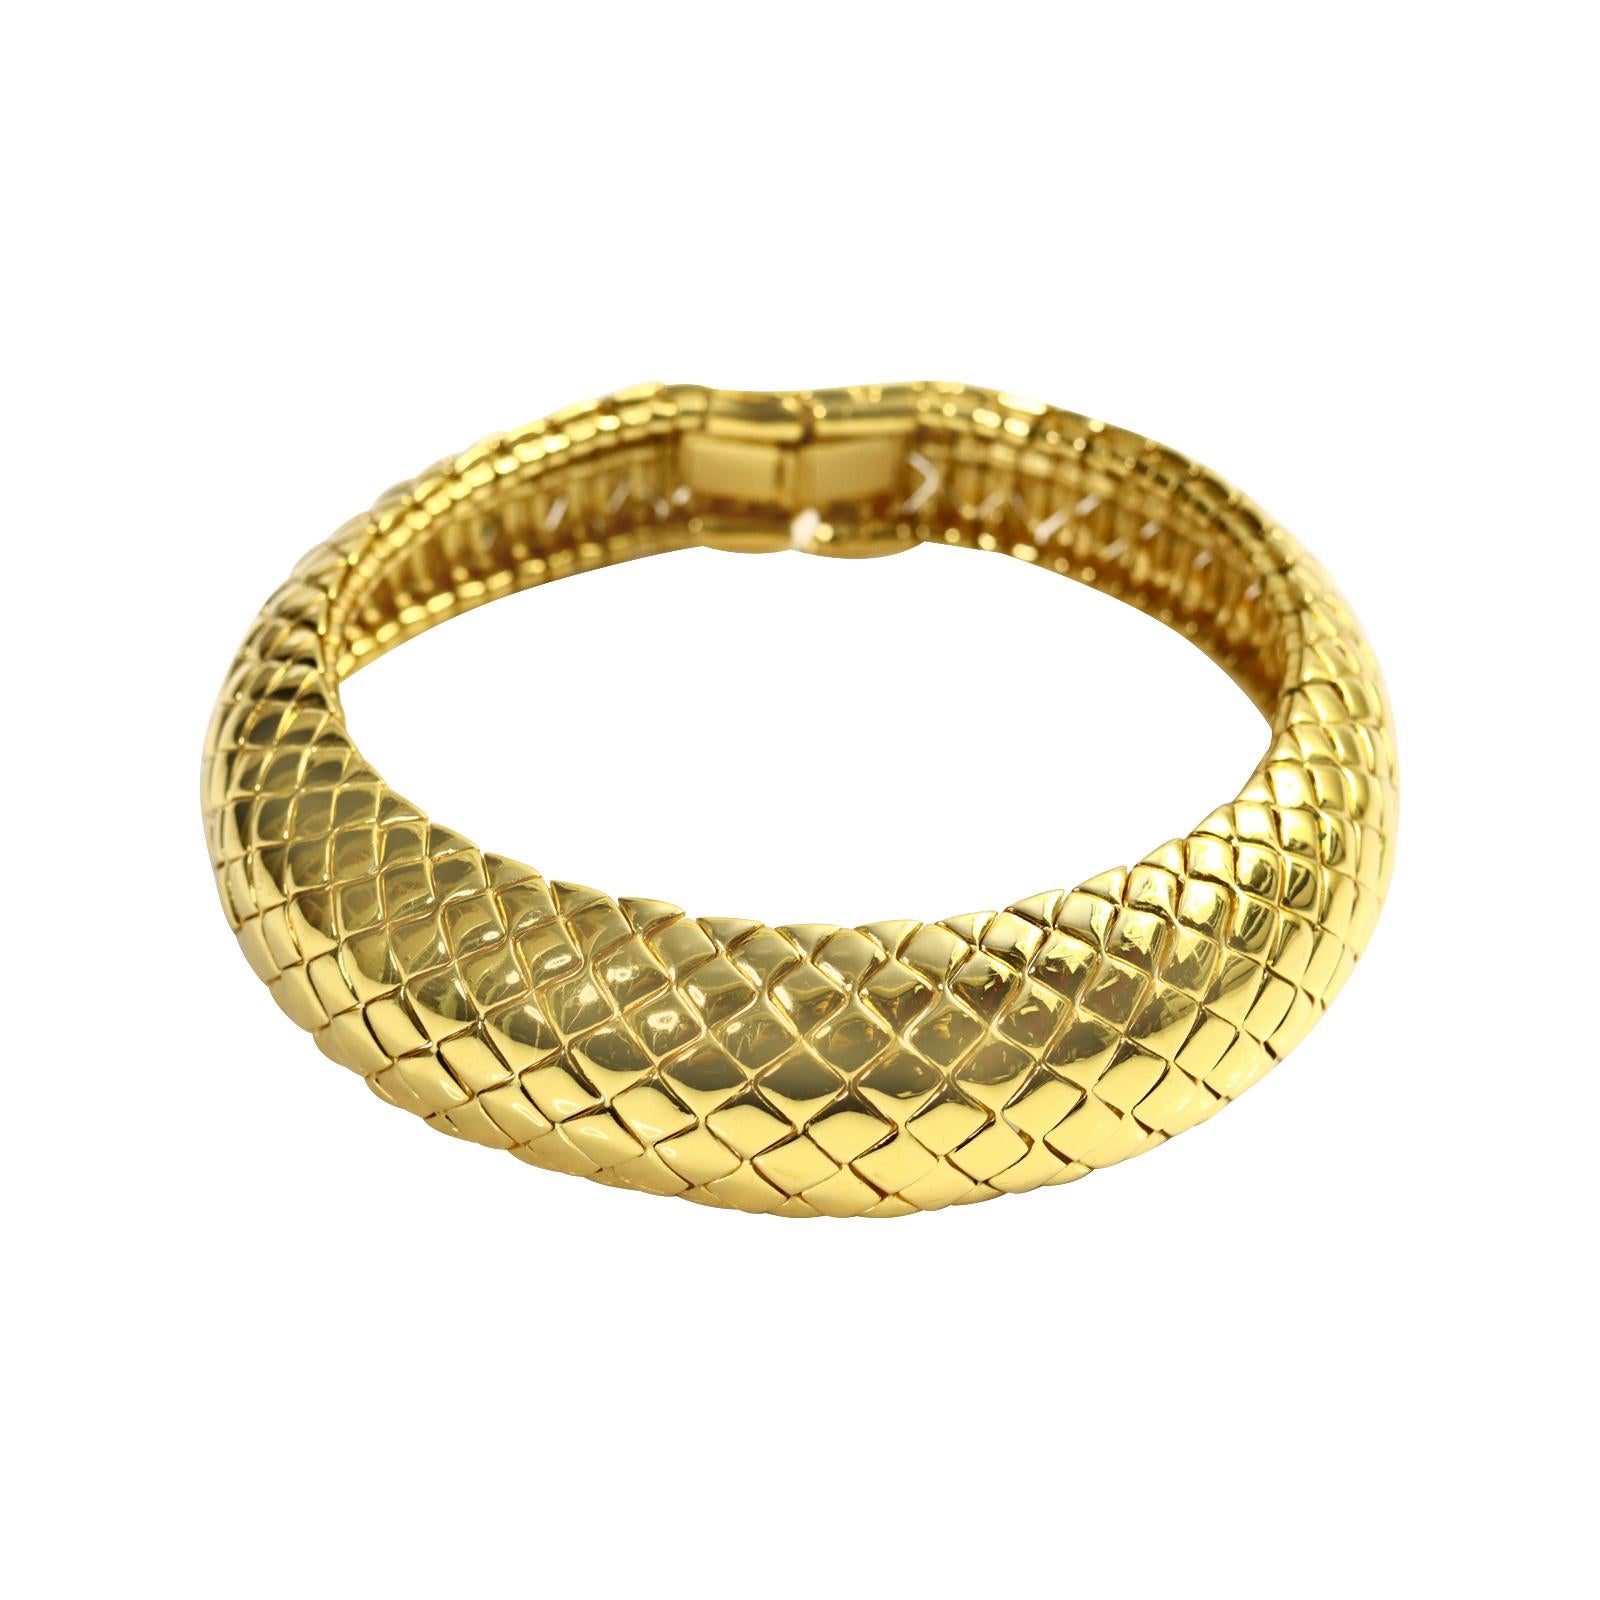 Women's or Men's Vintage Yves Saint Laurent YSL Gold Quilted Choker Necklace Circa 1980s